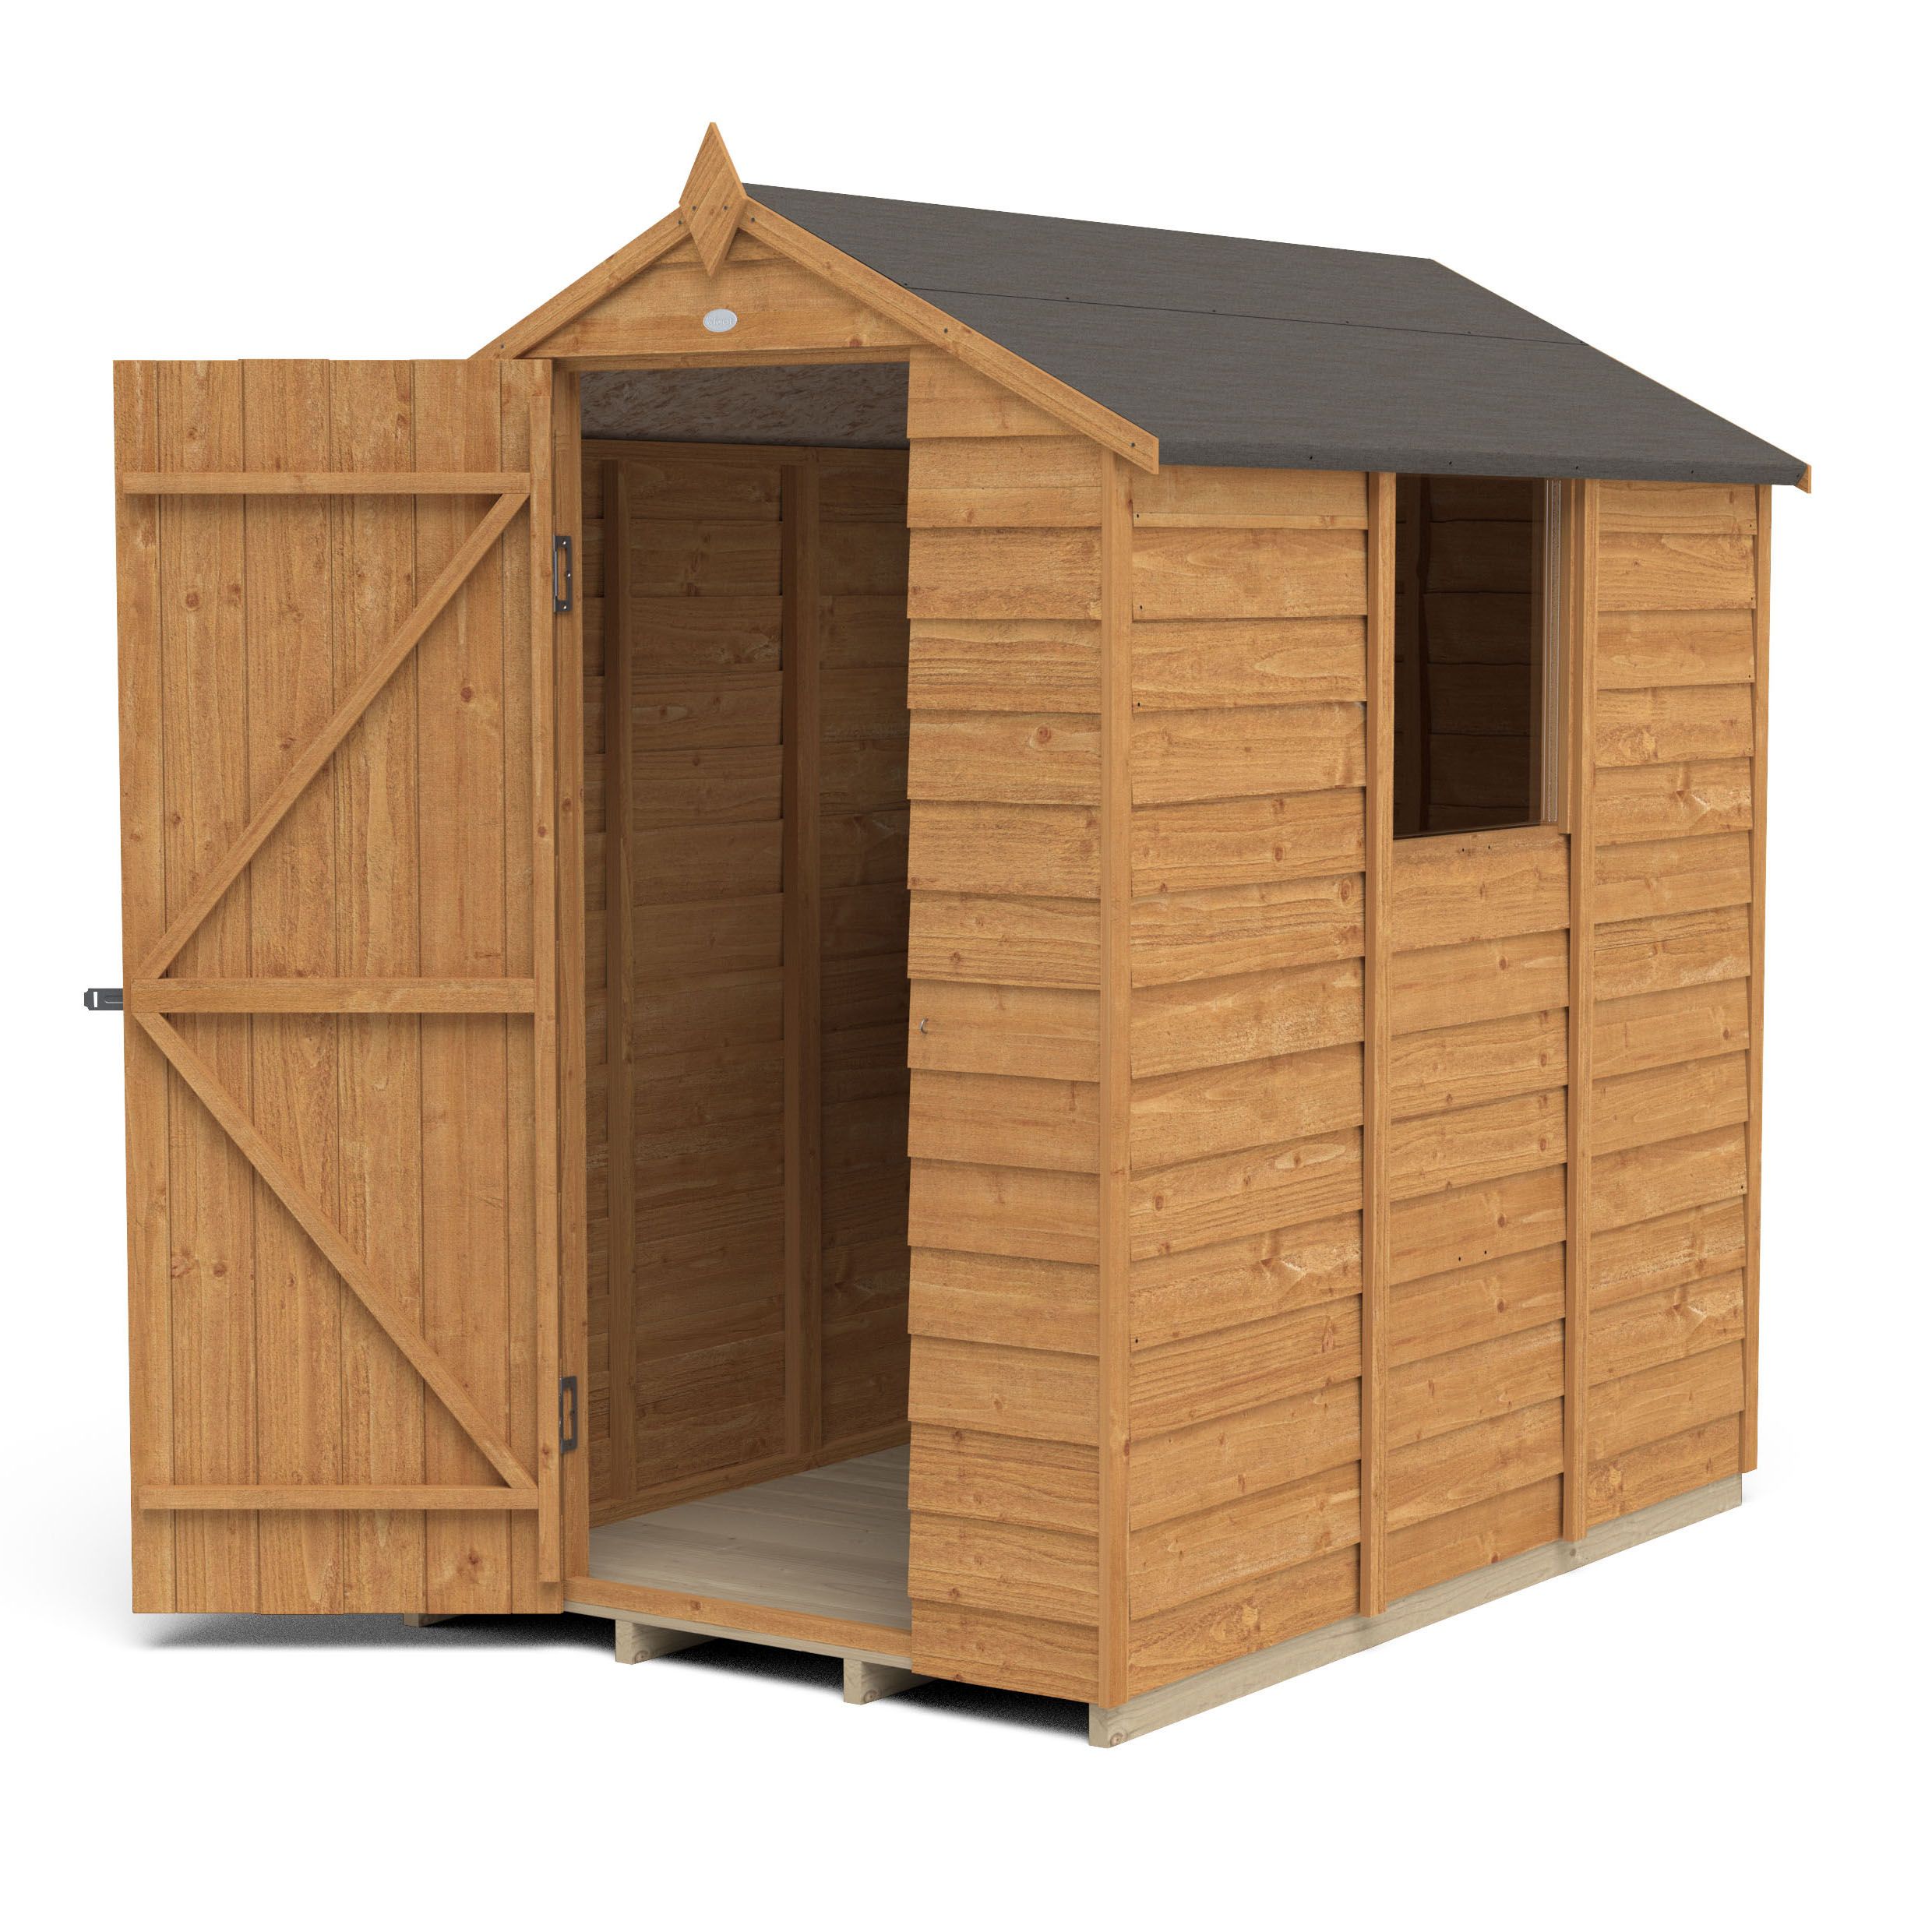 Forest Garden Overlap 6x4 ft Apex Wooden Dip treated Shed with floor & 1 window